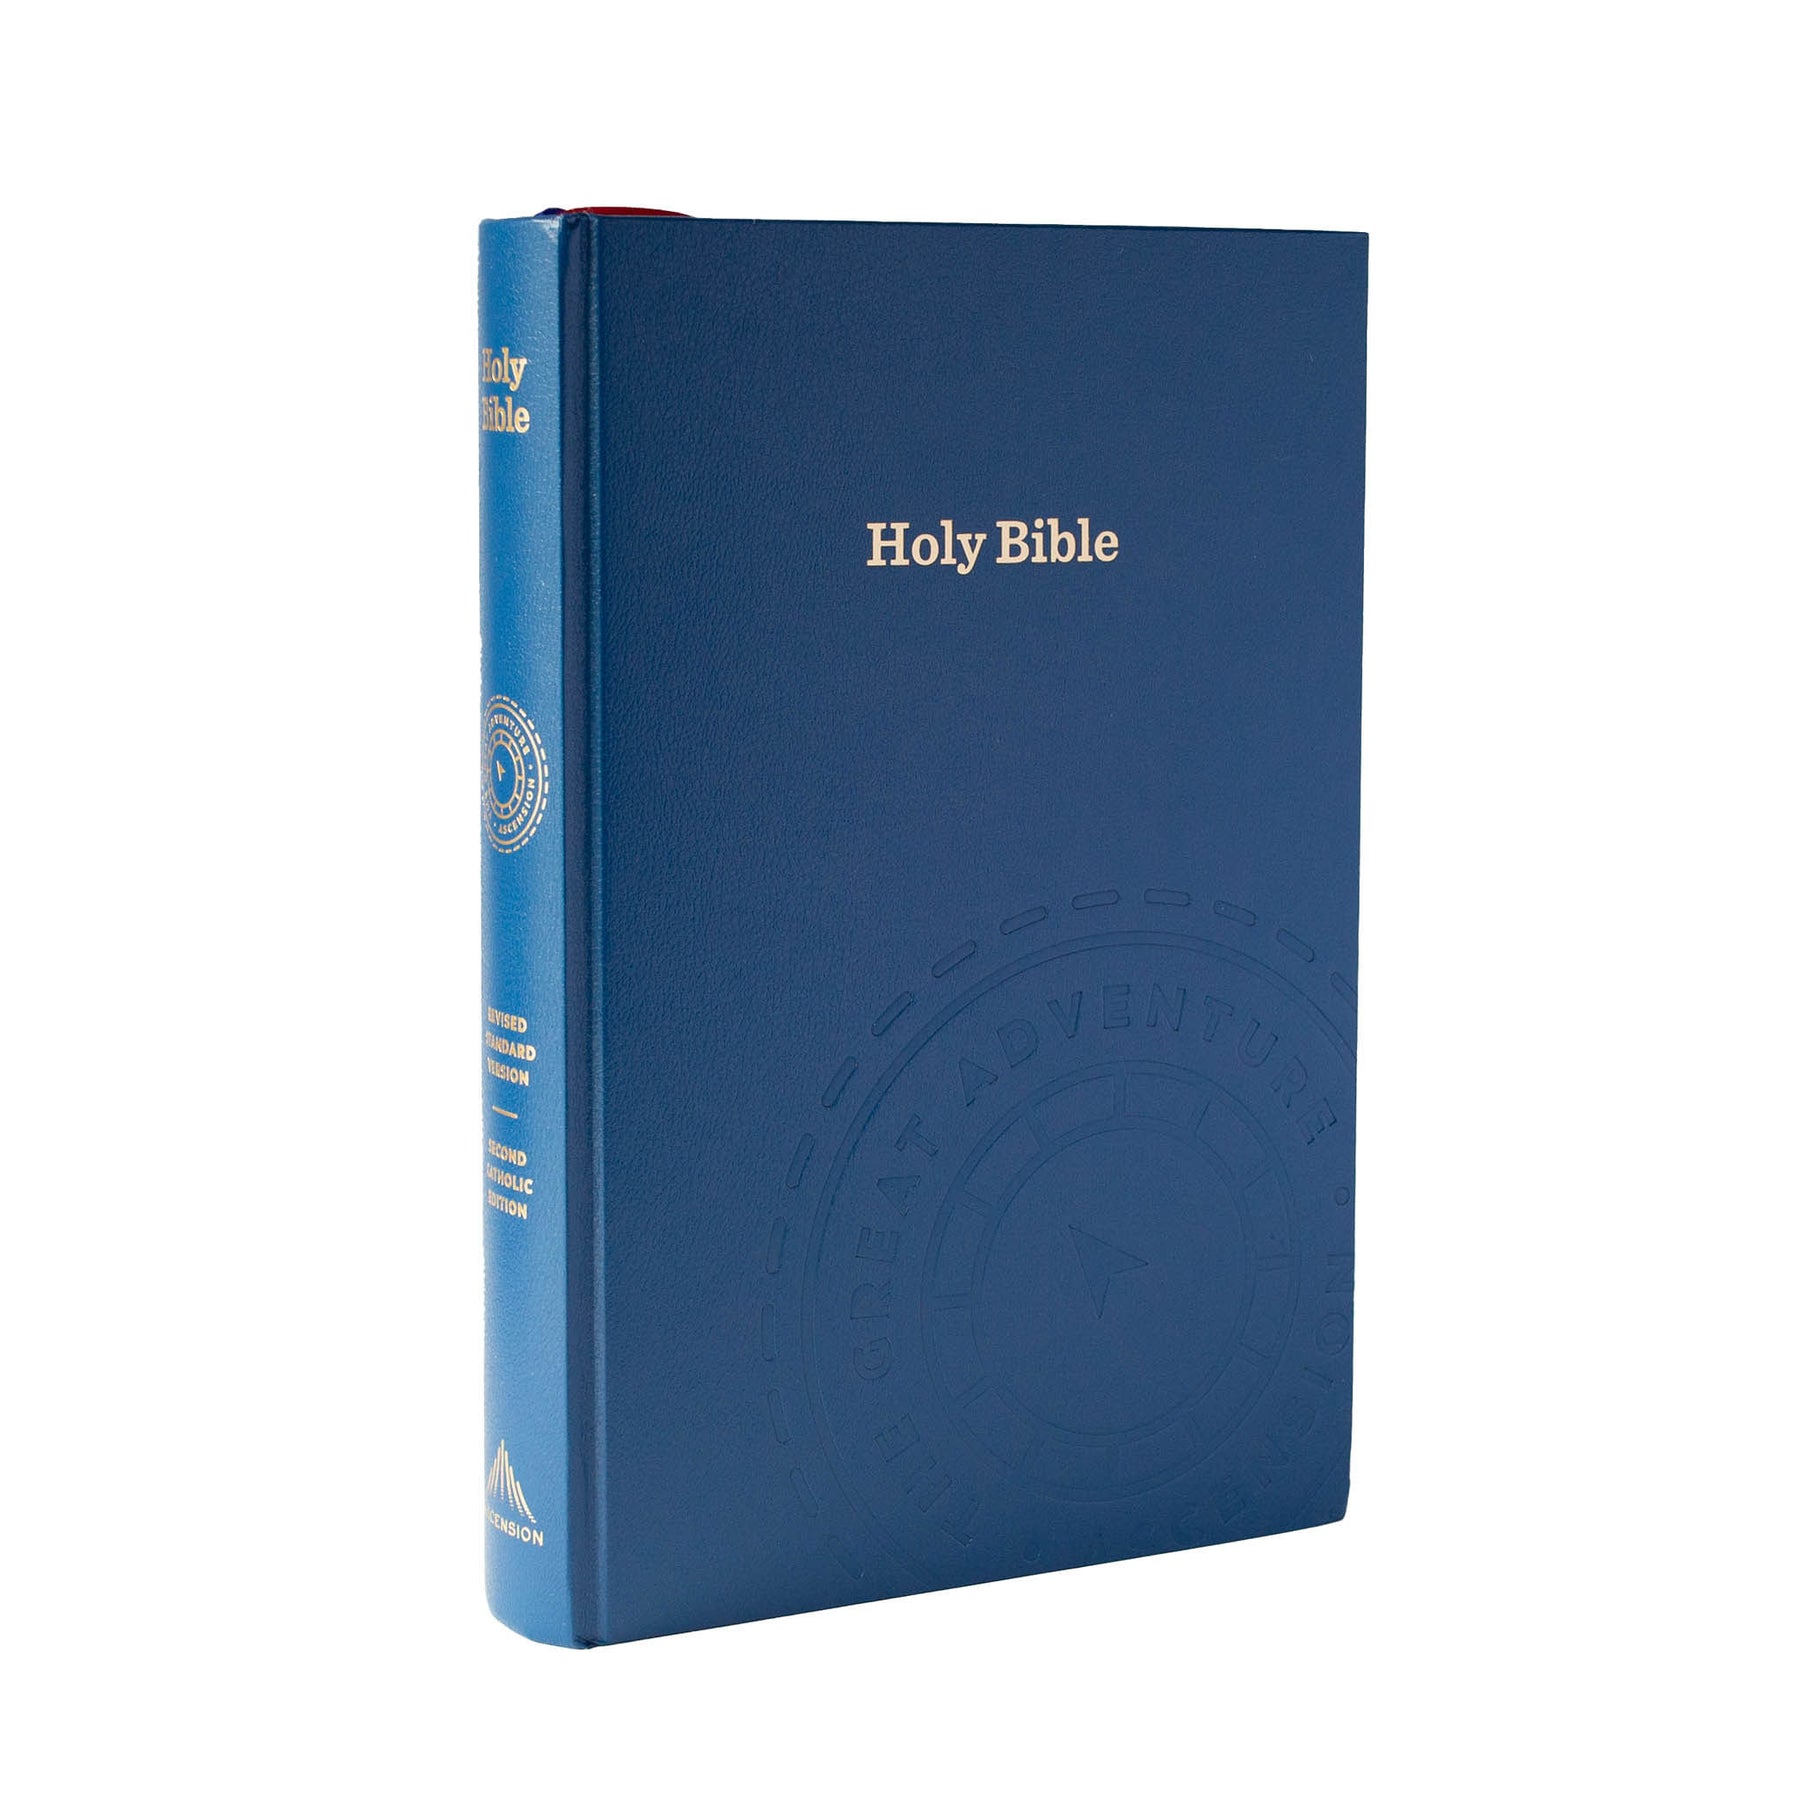 Holy　Bible　Print　Version　Bible,　The　Great　Catholic　Adventure　Large　–　Ascension